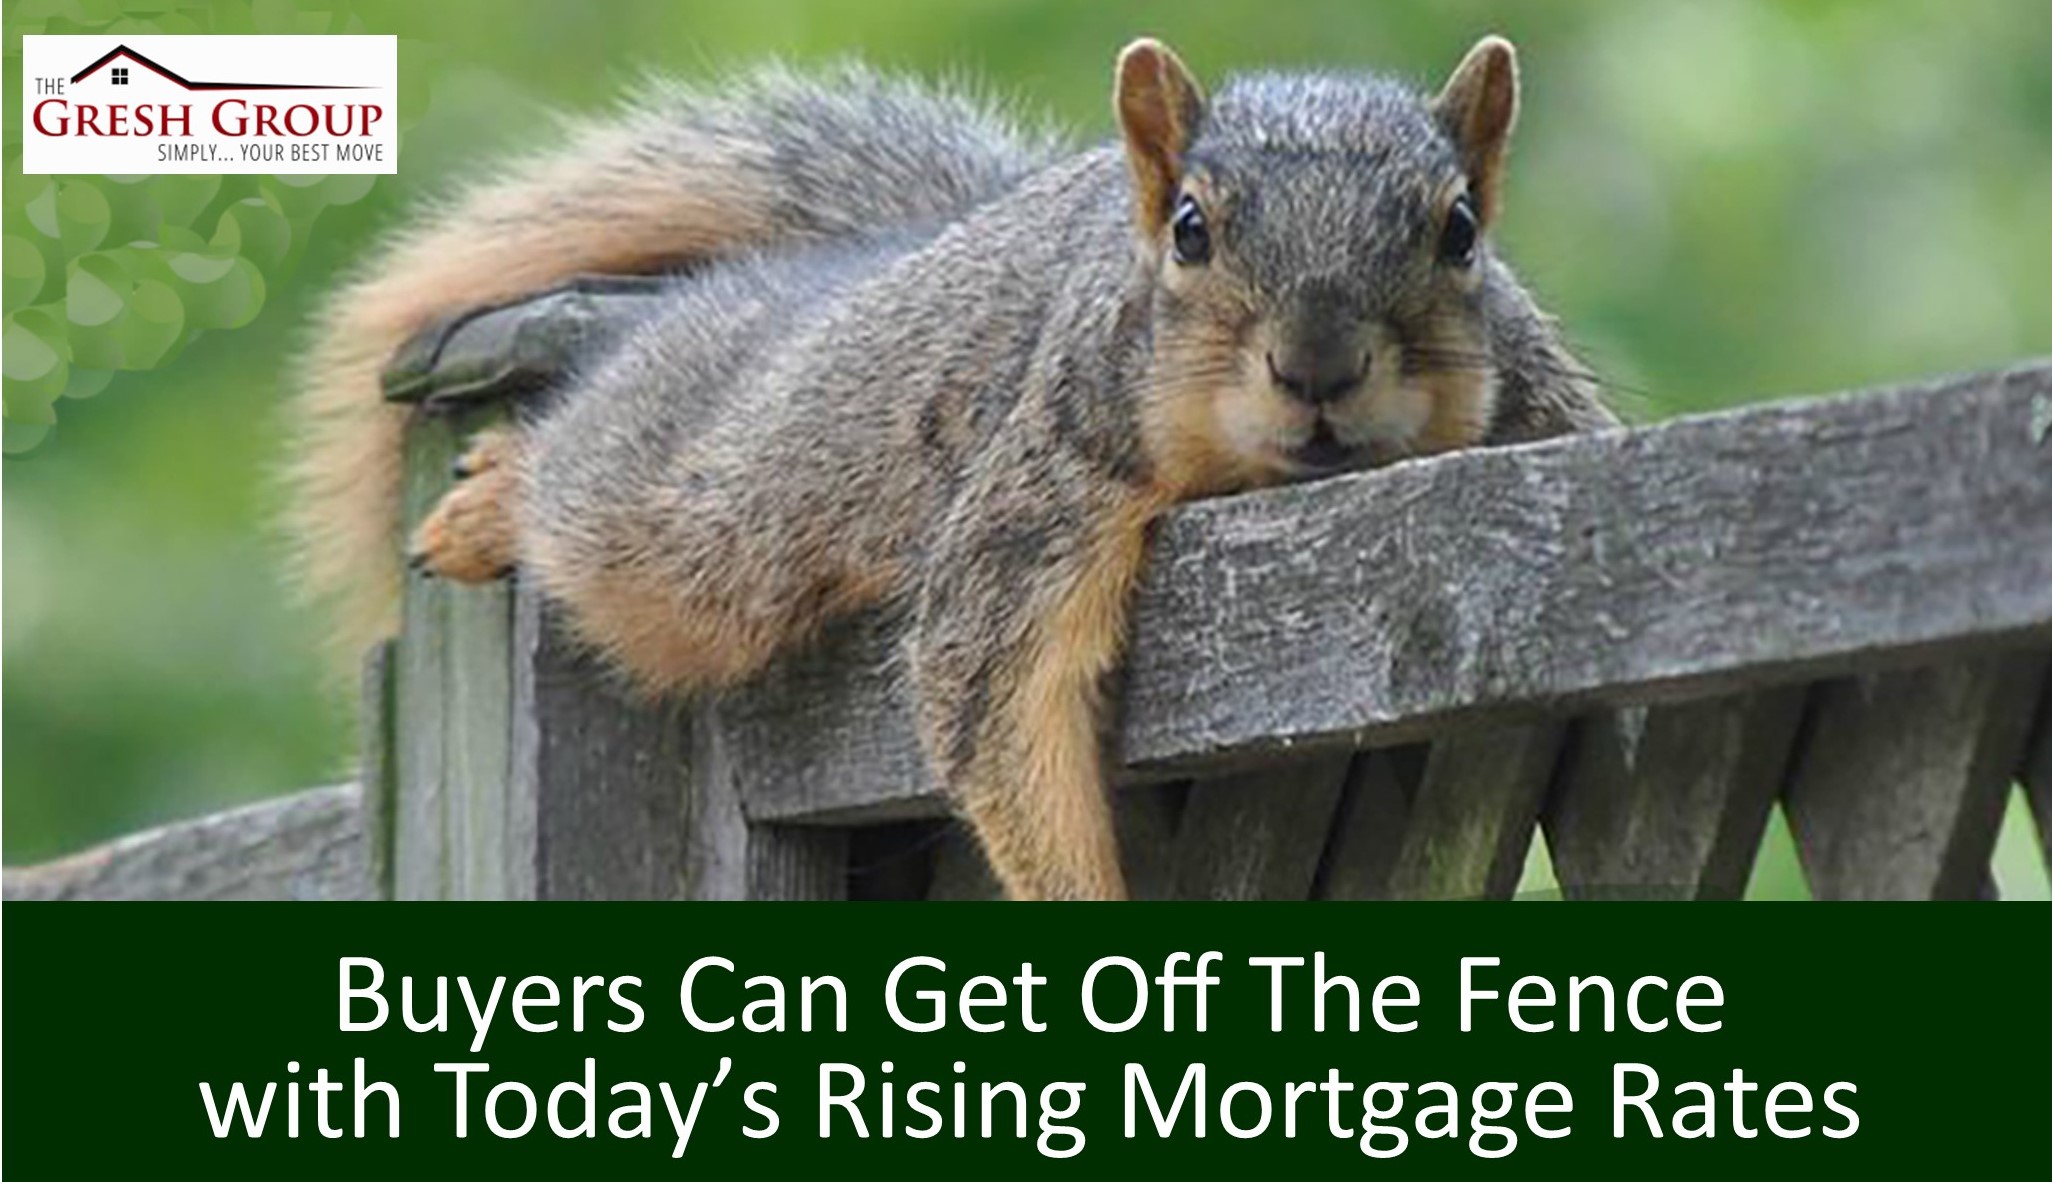 Buyers Can Get off the Fence Even with Today's Rising Mortgage Rates